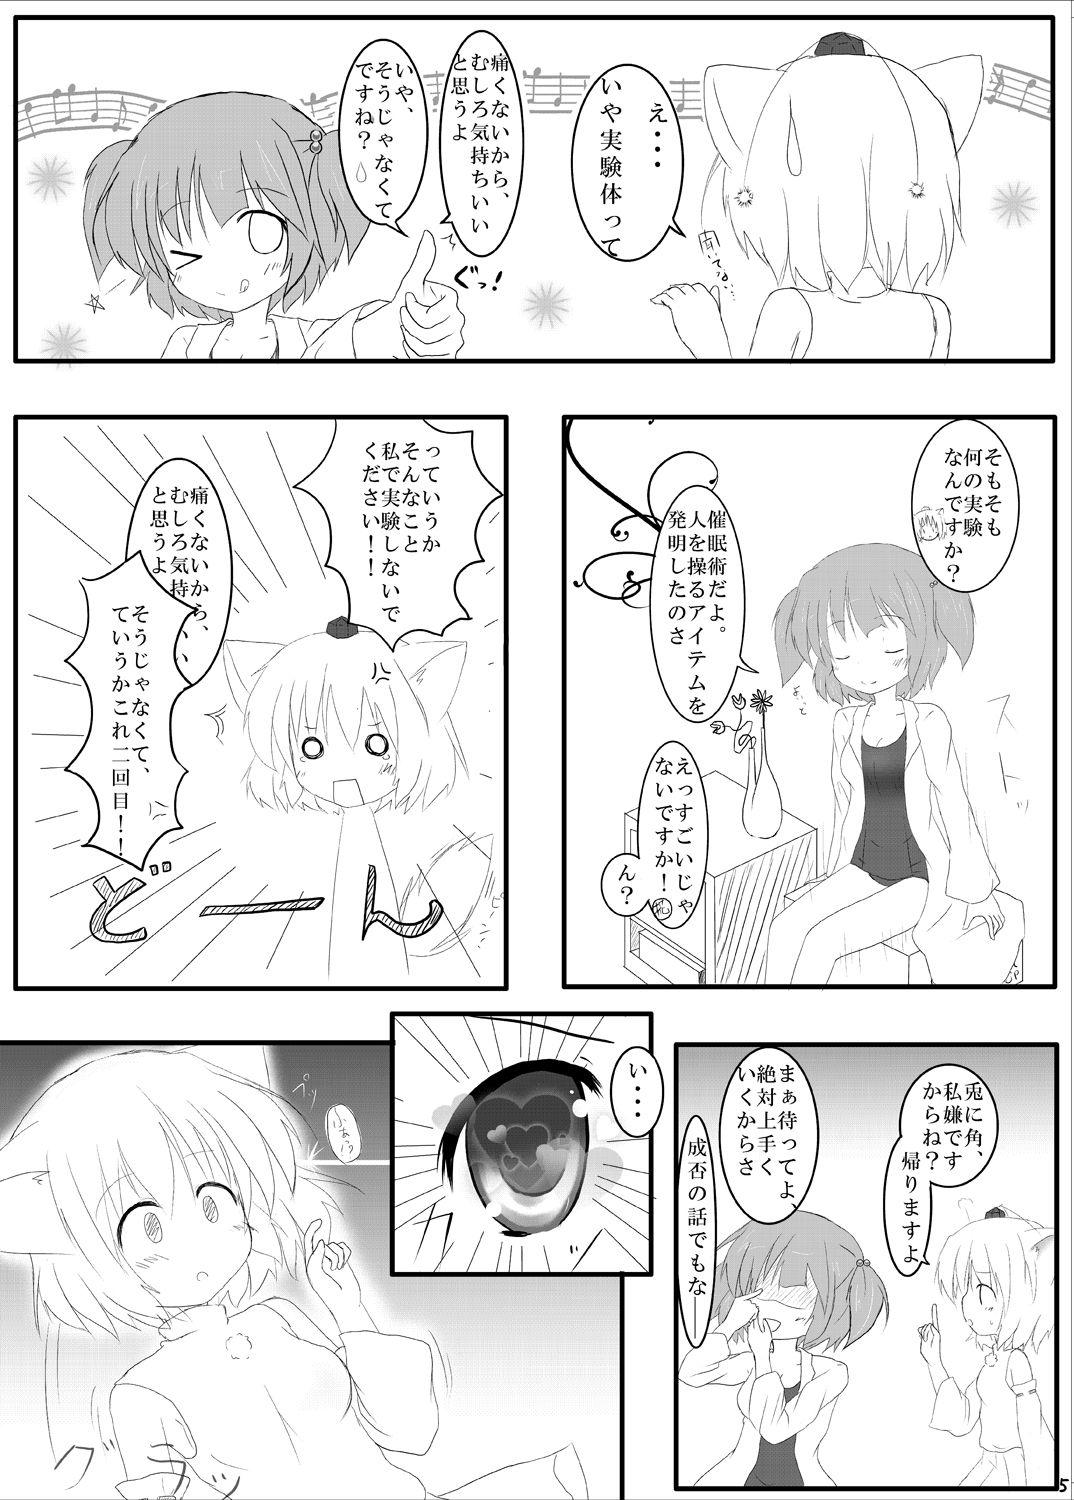 Free Blow Job H na "Me" ni Acchatta! - Touhou project Indonesian - Page 4